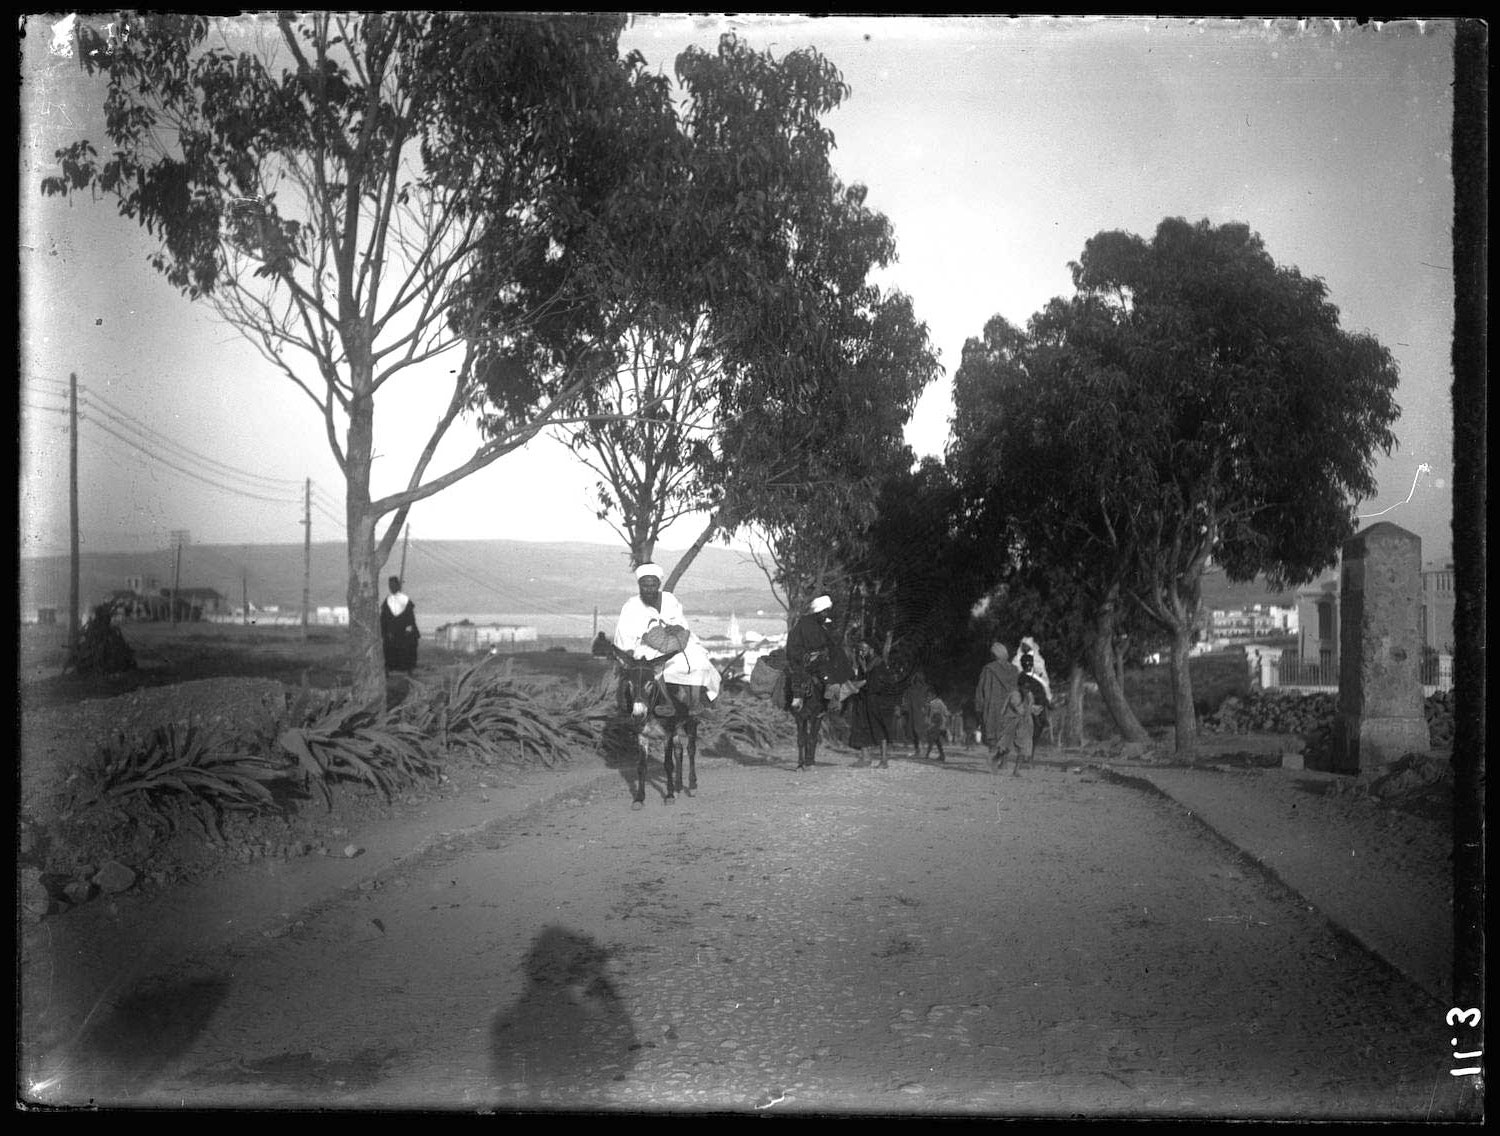 A man rides his donkey along a street on the outskirts of town, with the bay of Tangier in the background